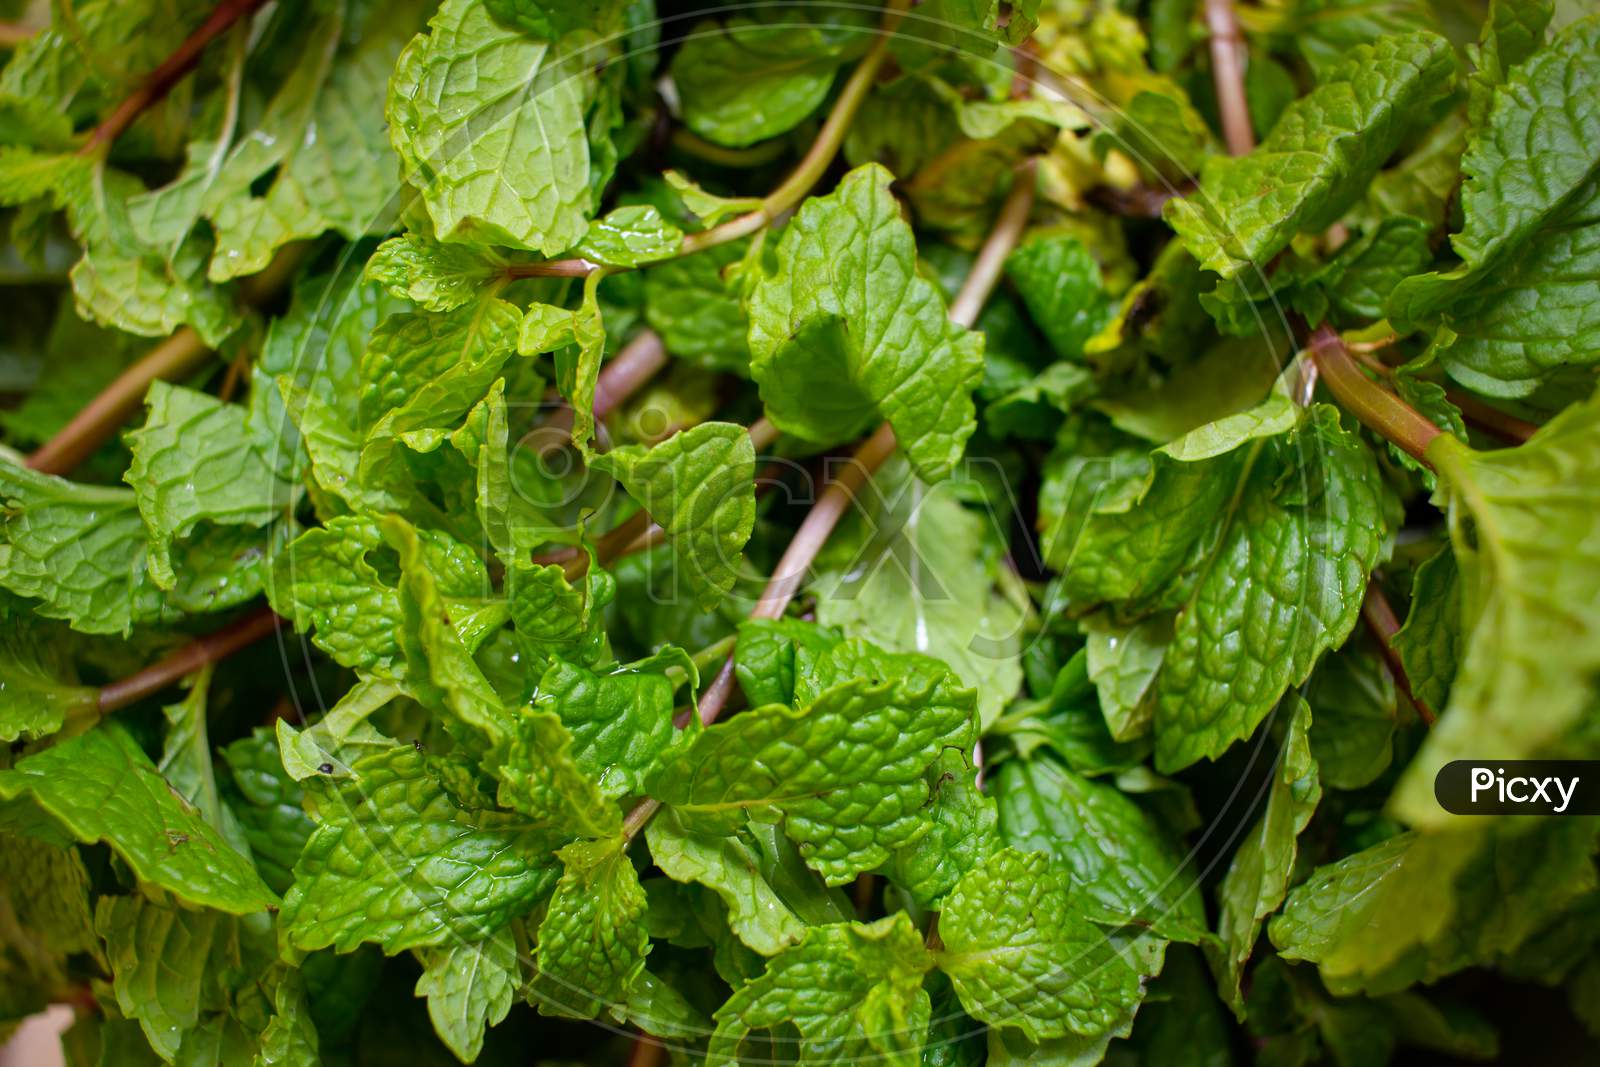 Fresh Mint Leaves Used For Flavoring And As Common Herb In Cooking.